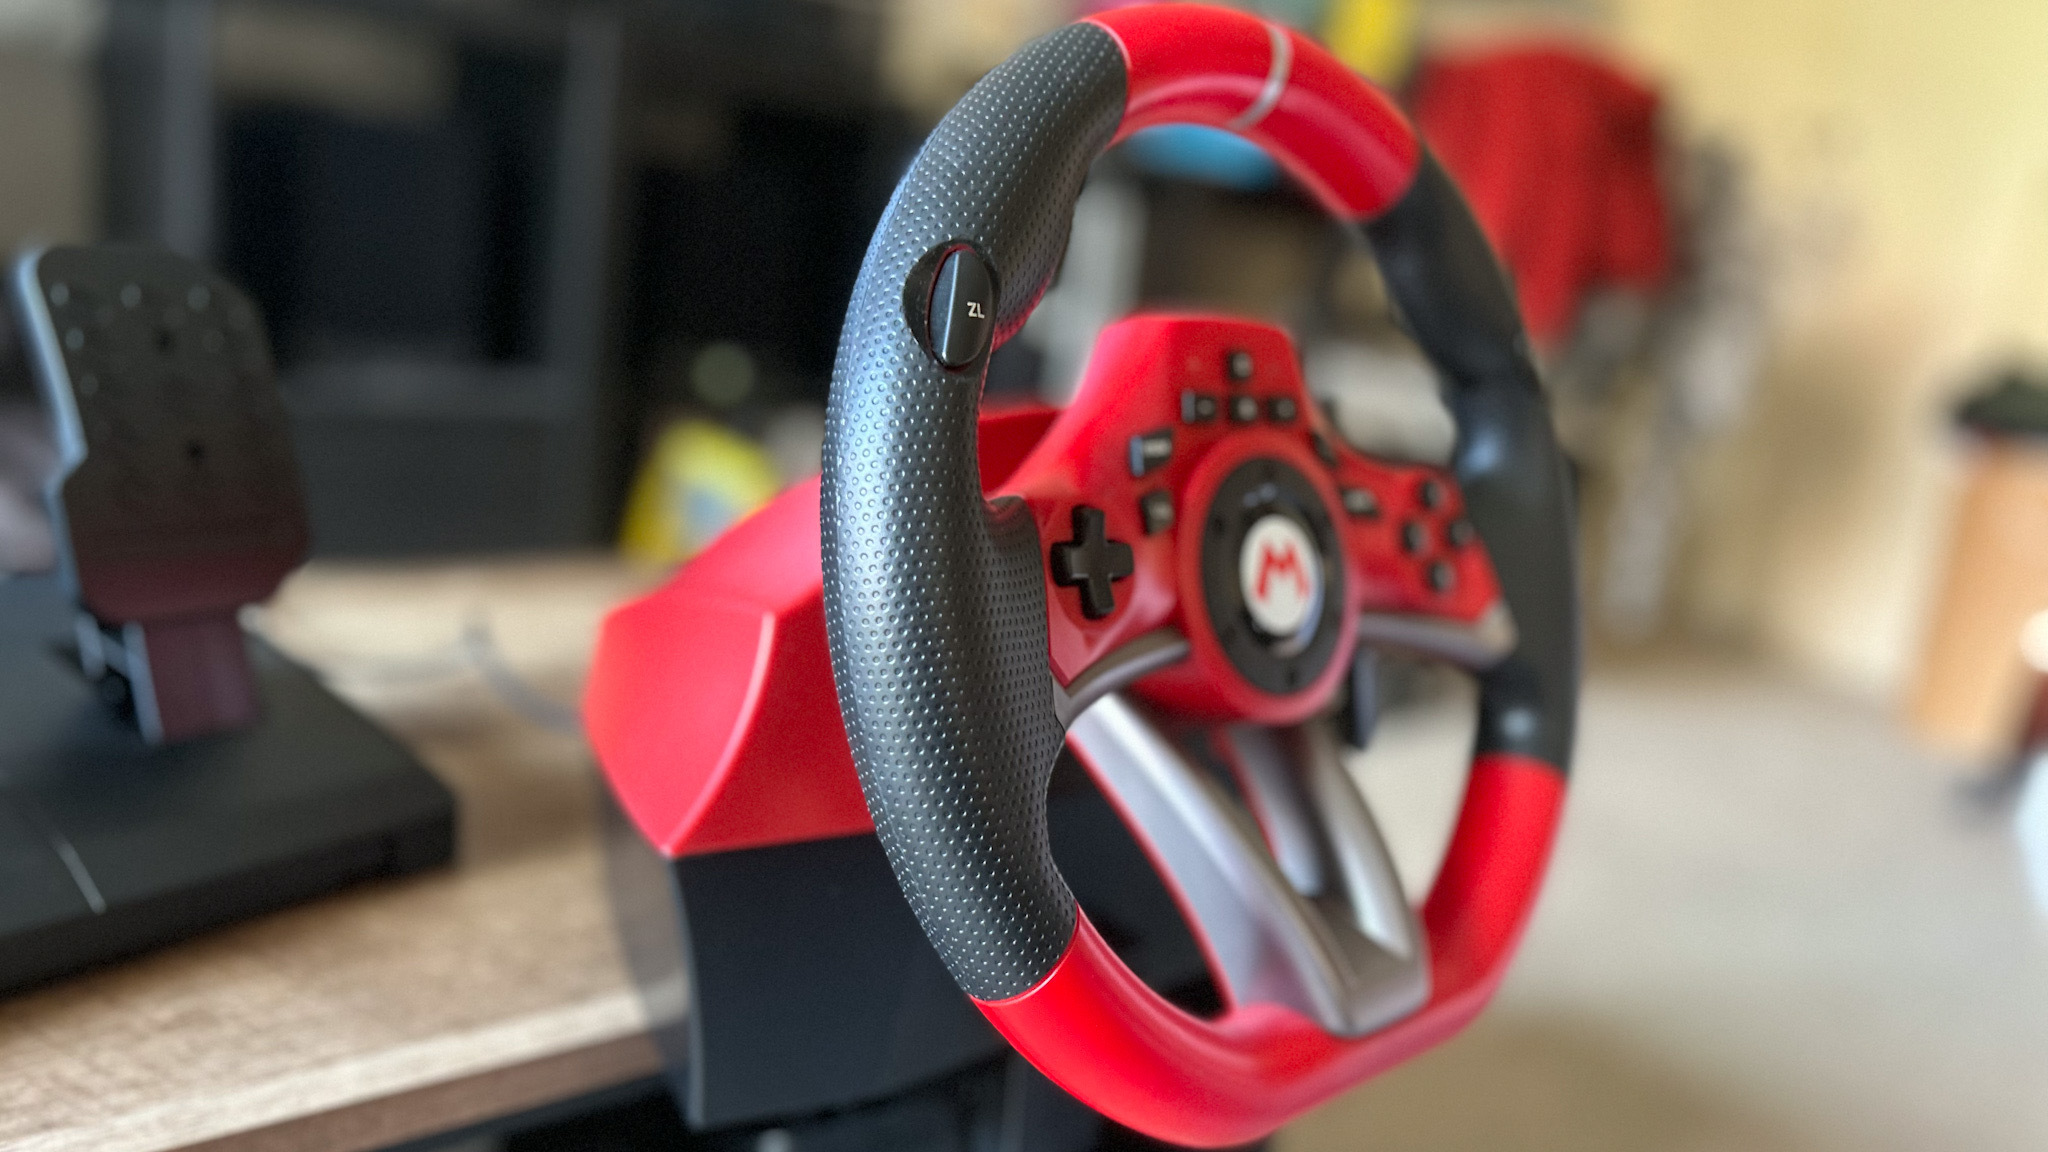 Hori Mario Kart Pro Deluxe racing wheel review: “everything a kart can ask for at a great price”